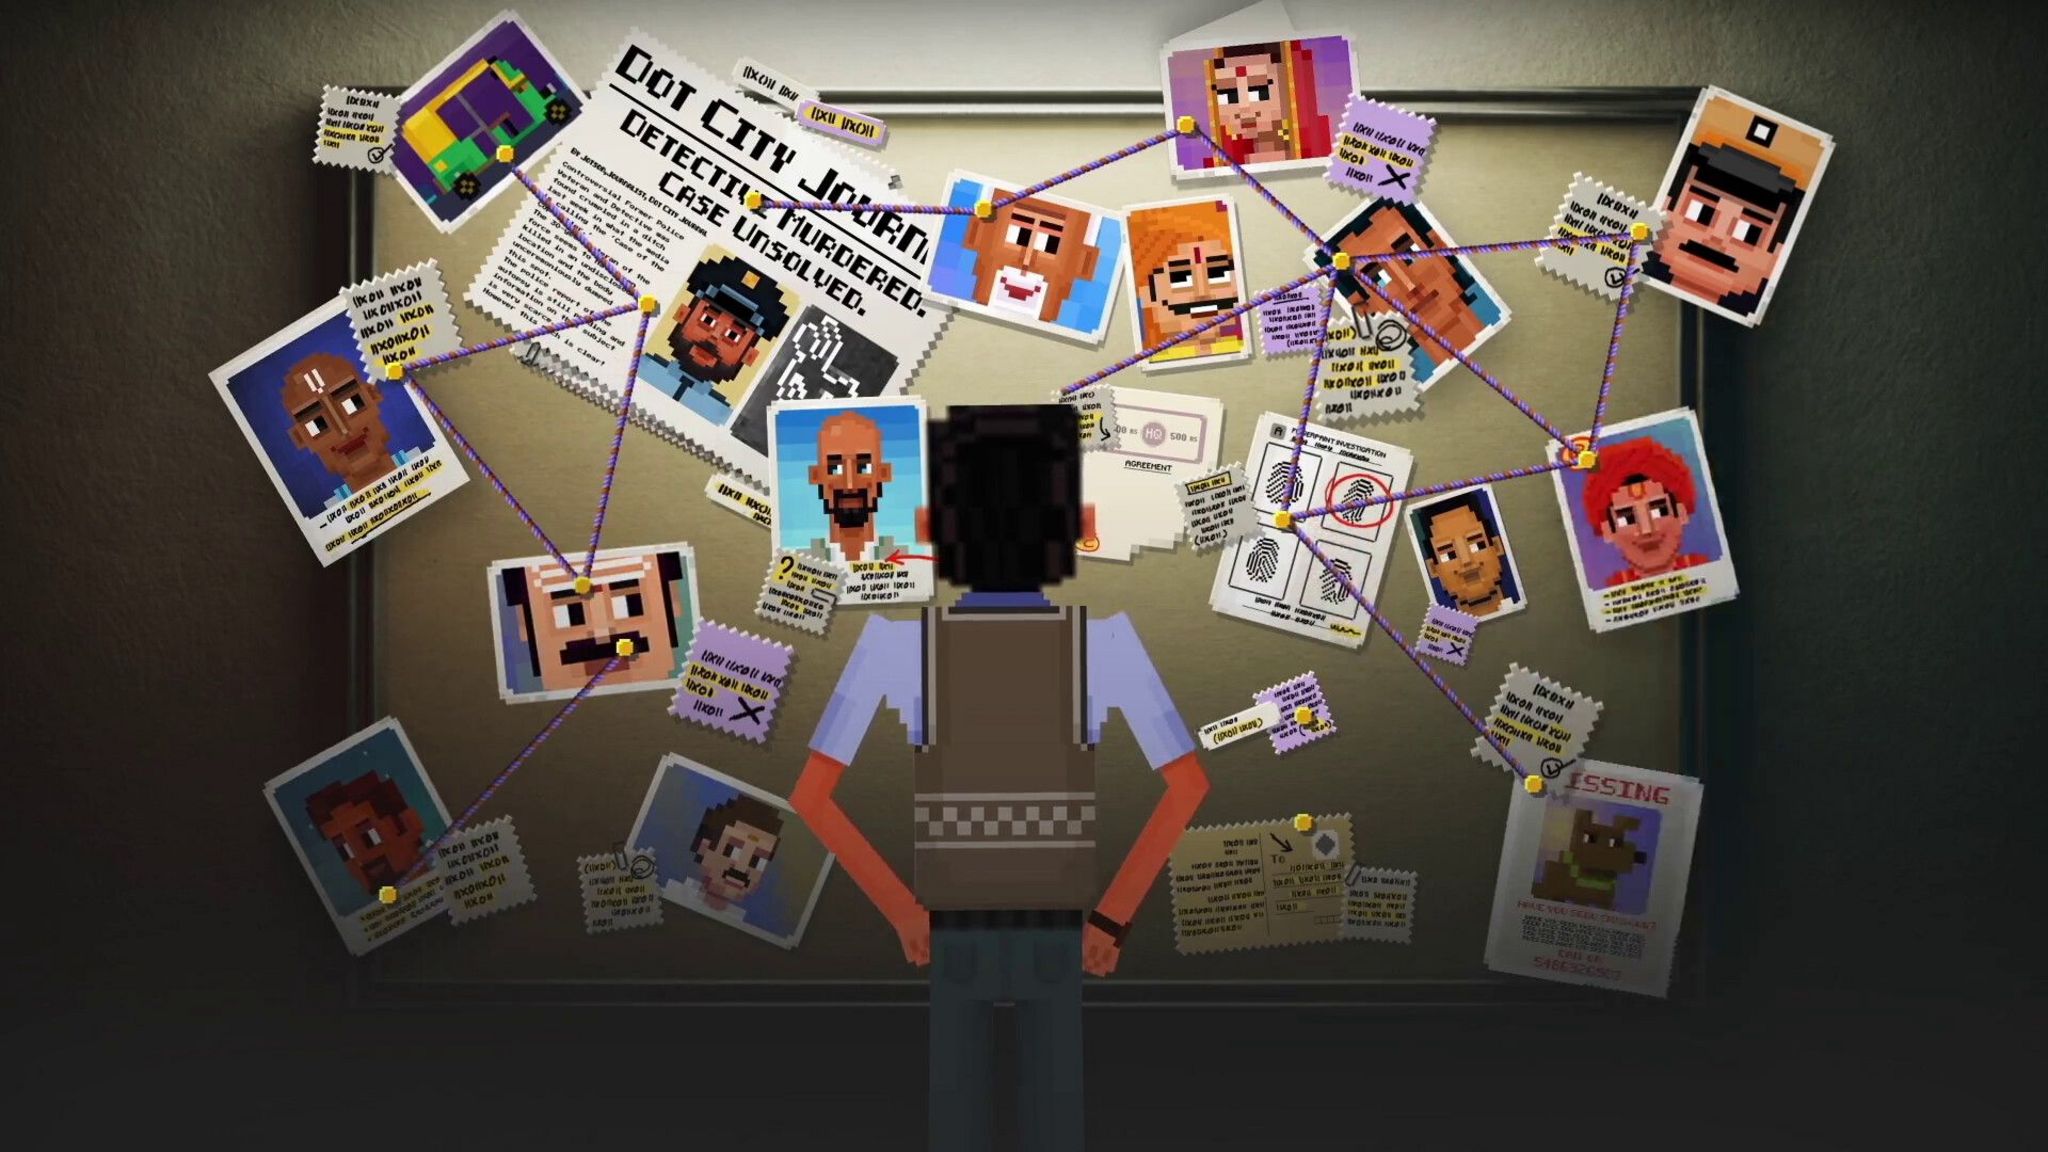 A pixel art image shows the back of a male character wearing a police vest, hands on hips as he studys a pegboard filled with clues. A patchwork of notes, newspaper clippings and photos are all linked together with pieces of string.